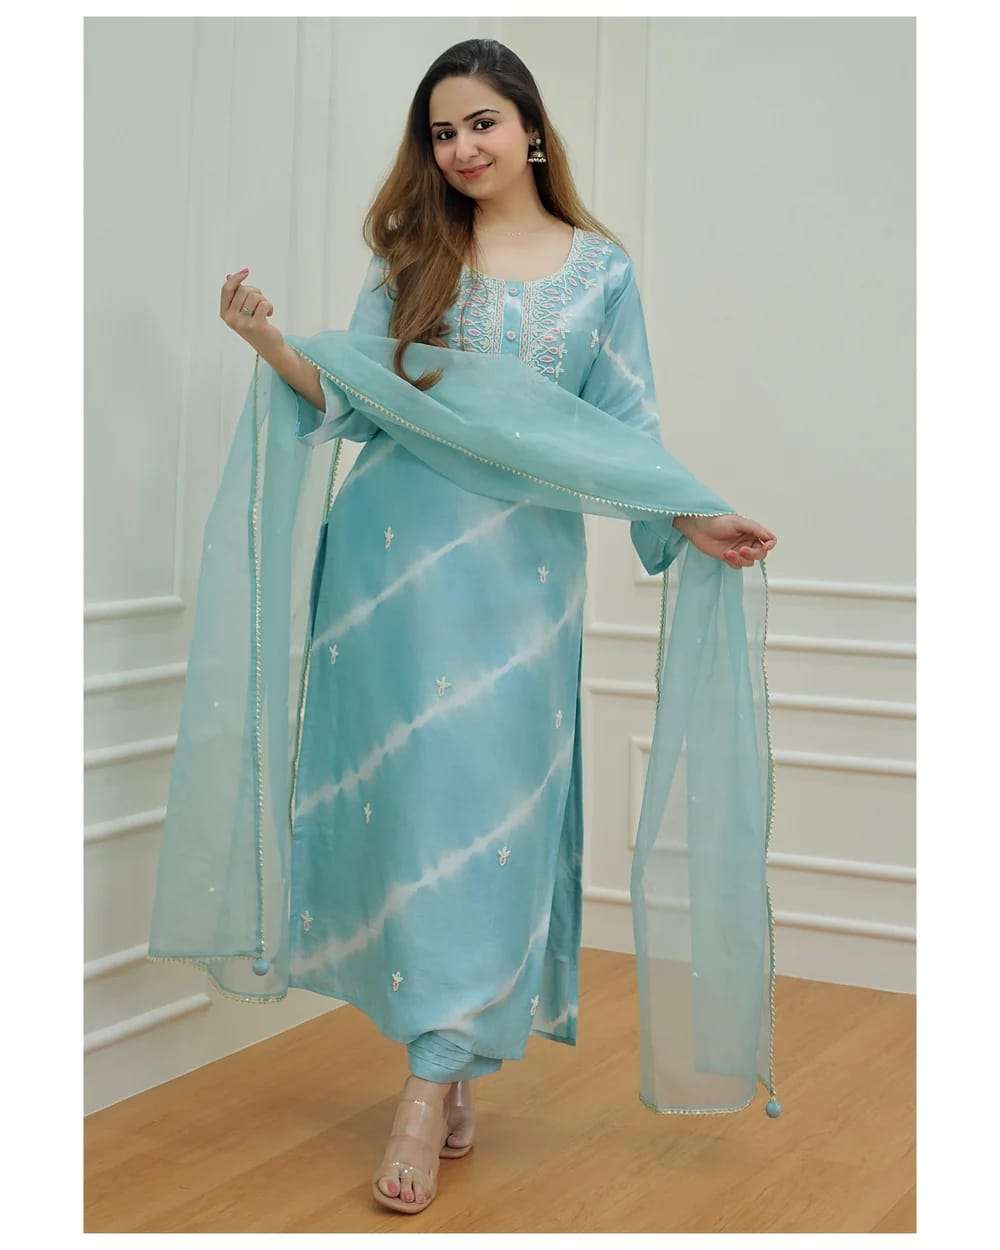 rakhi special new launching pure chanderi silk suit with organza dupatta sky blue leheriya silk suit hand embroidery allover sky blue readymade suit 